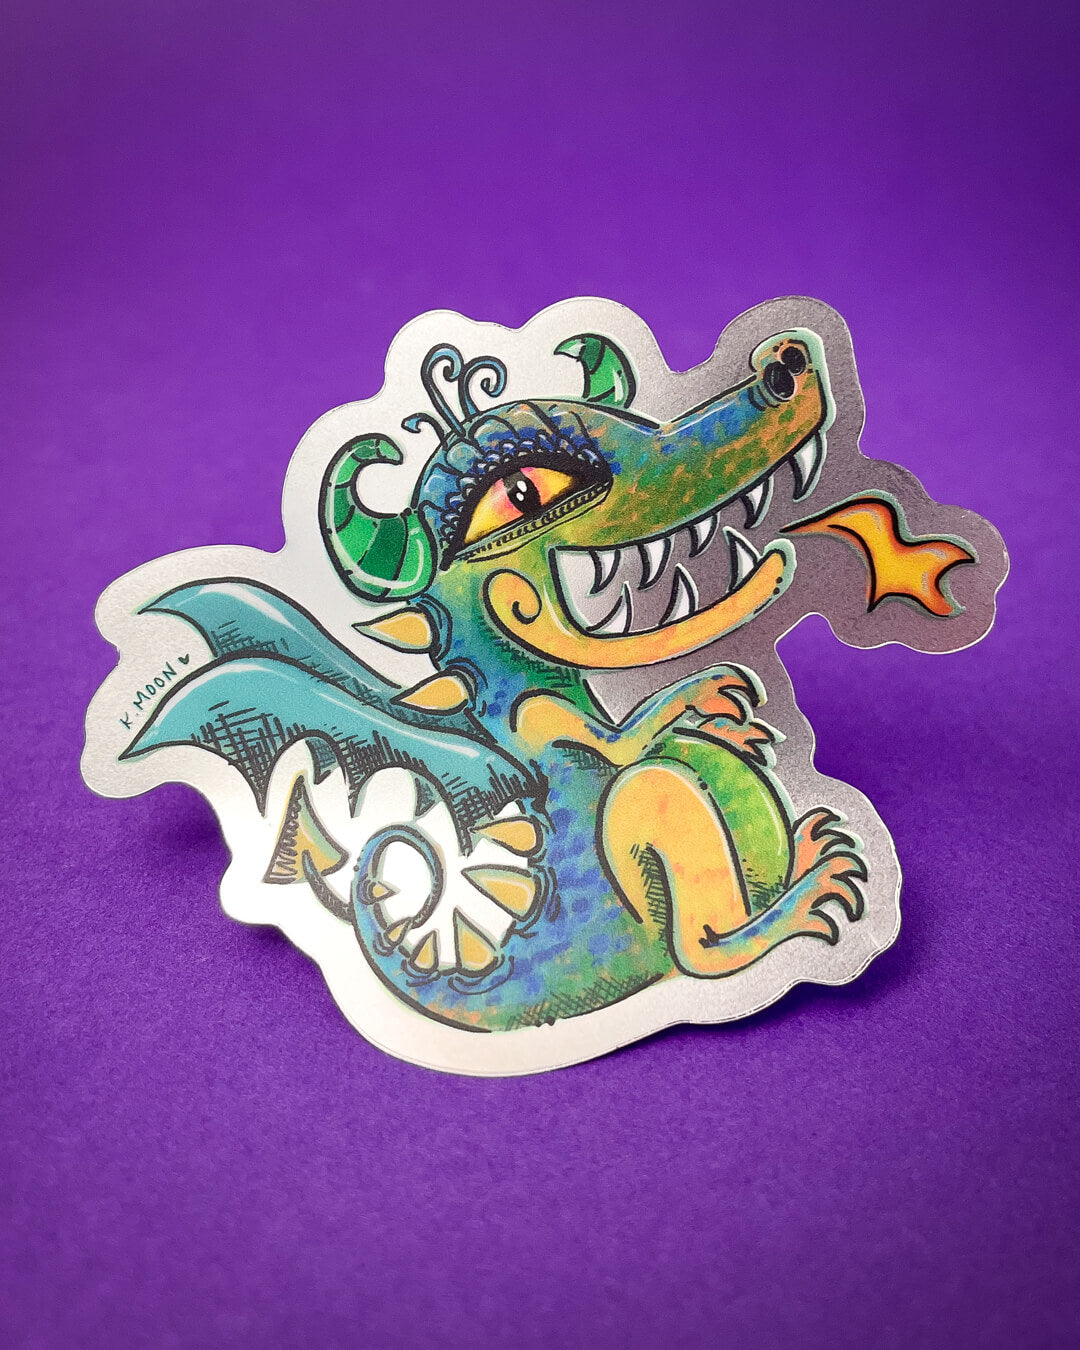 A dragon smiling and breathing fire artwork This is a Custom Phantom Sticker Printed by Rockin Monkey